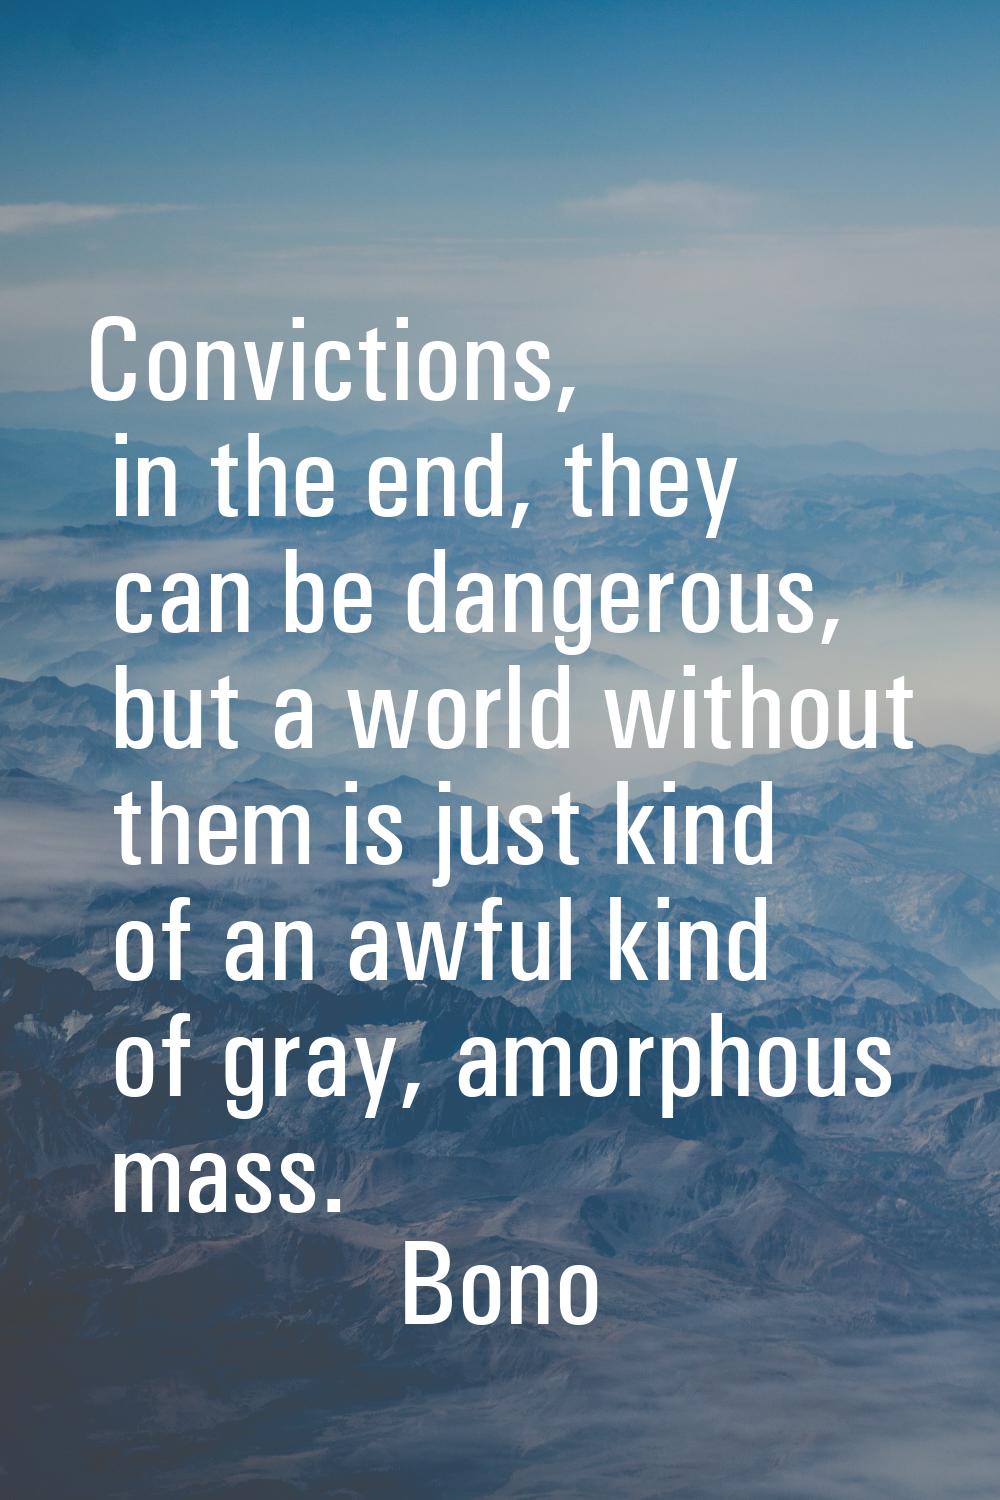 Convictions, in the end, they can be dangerous, but a world without them is just kind of an awful k